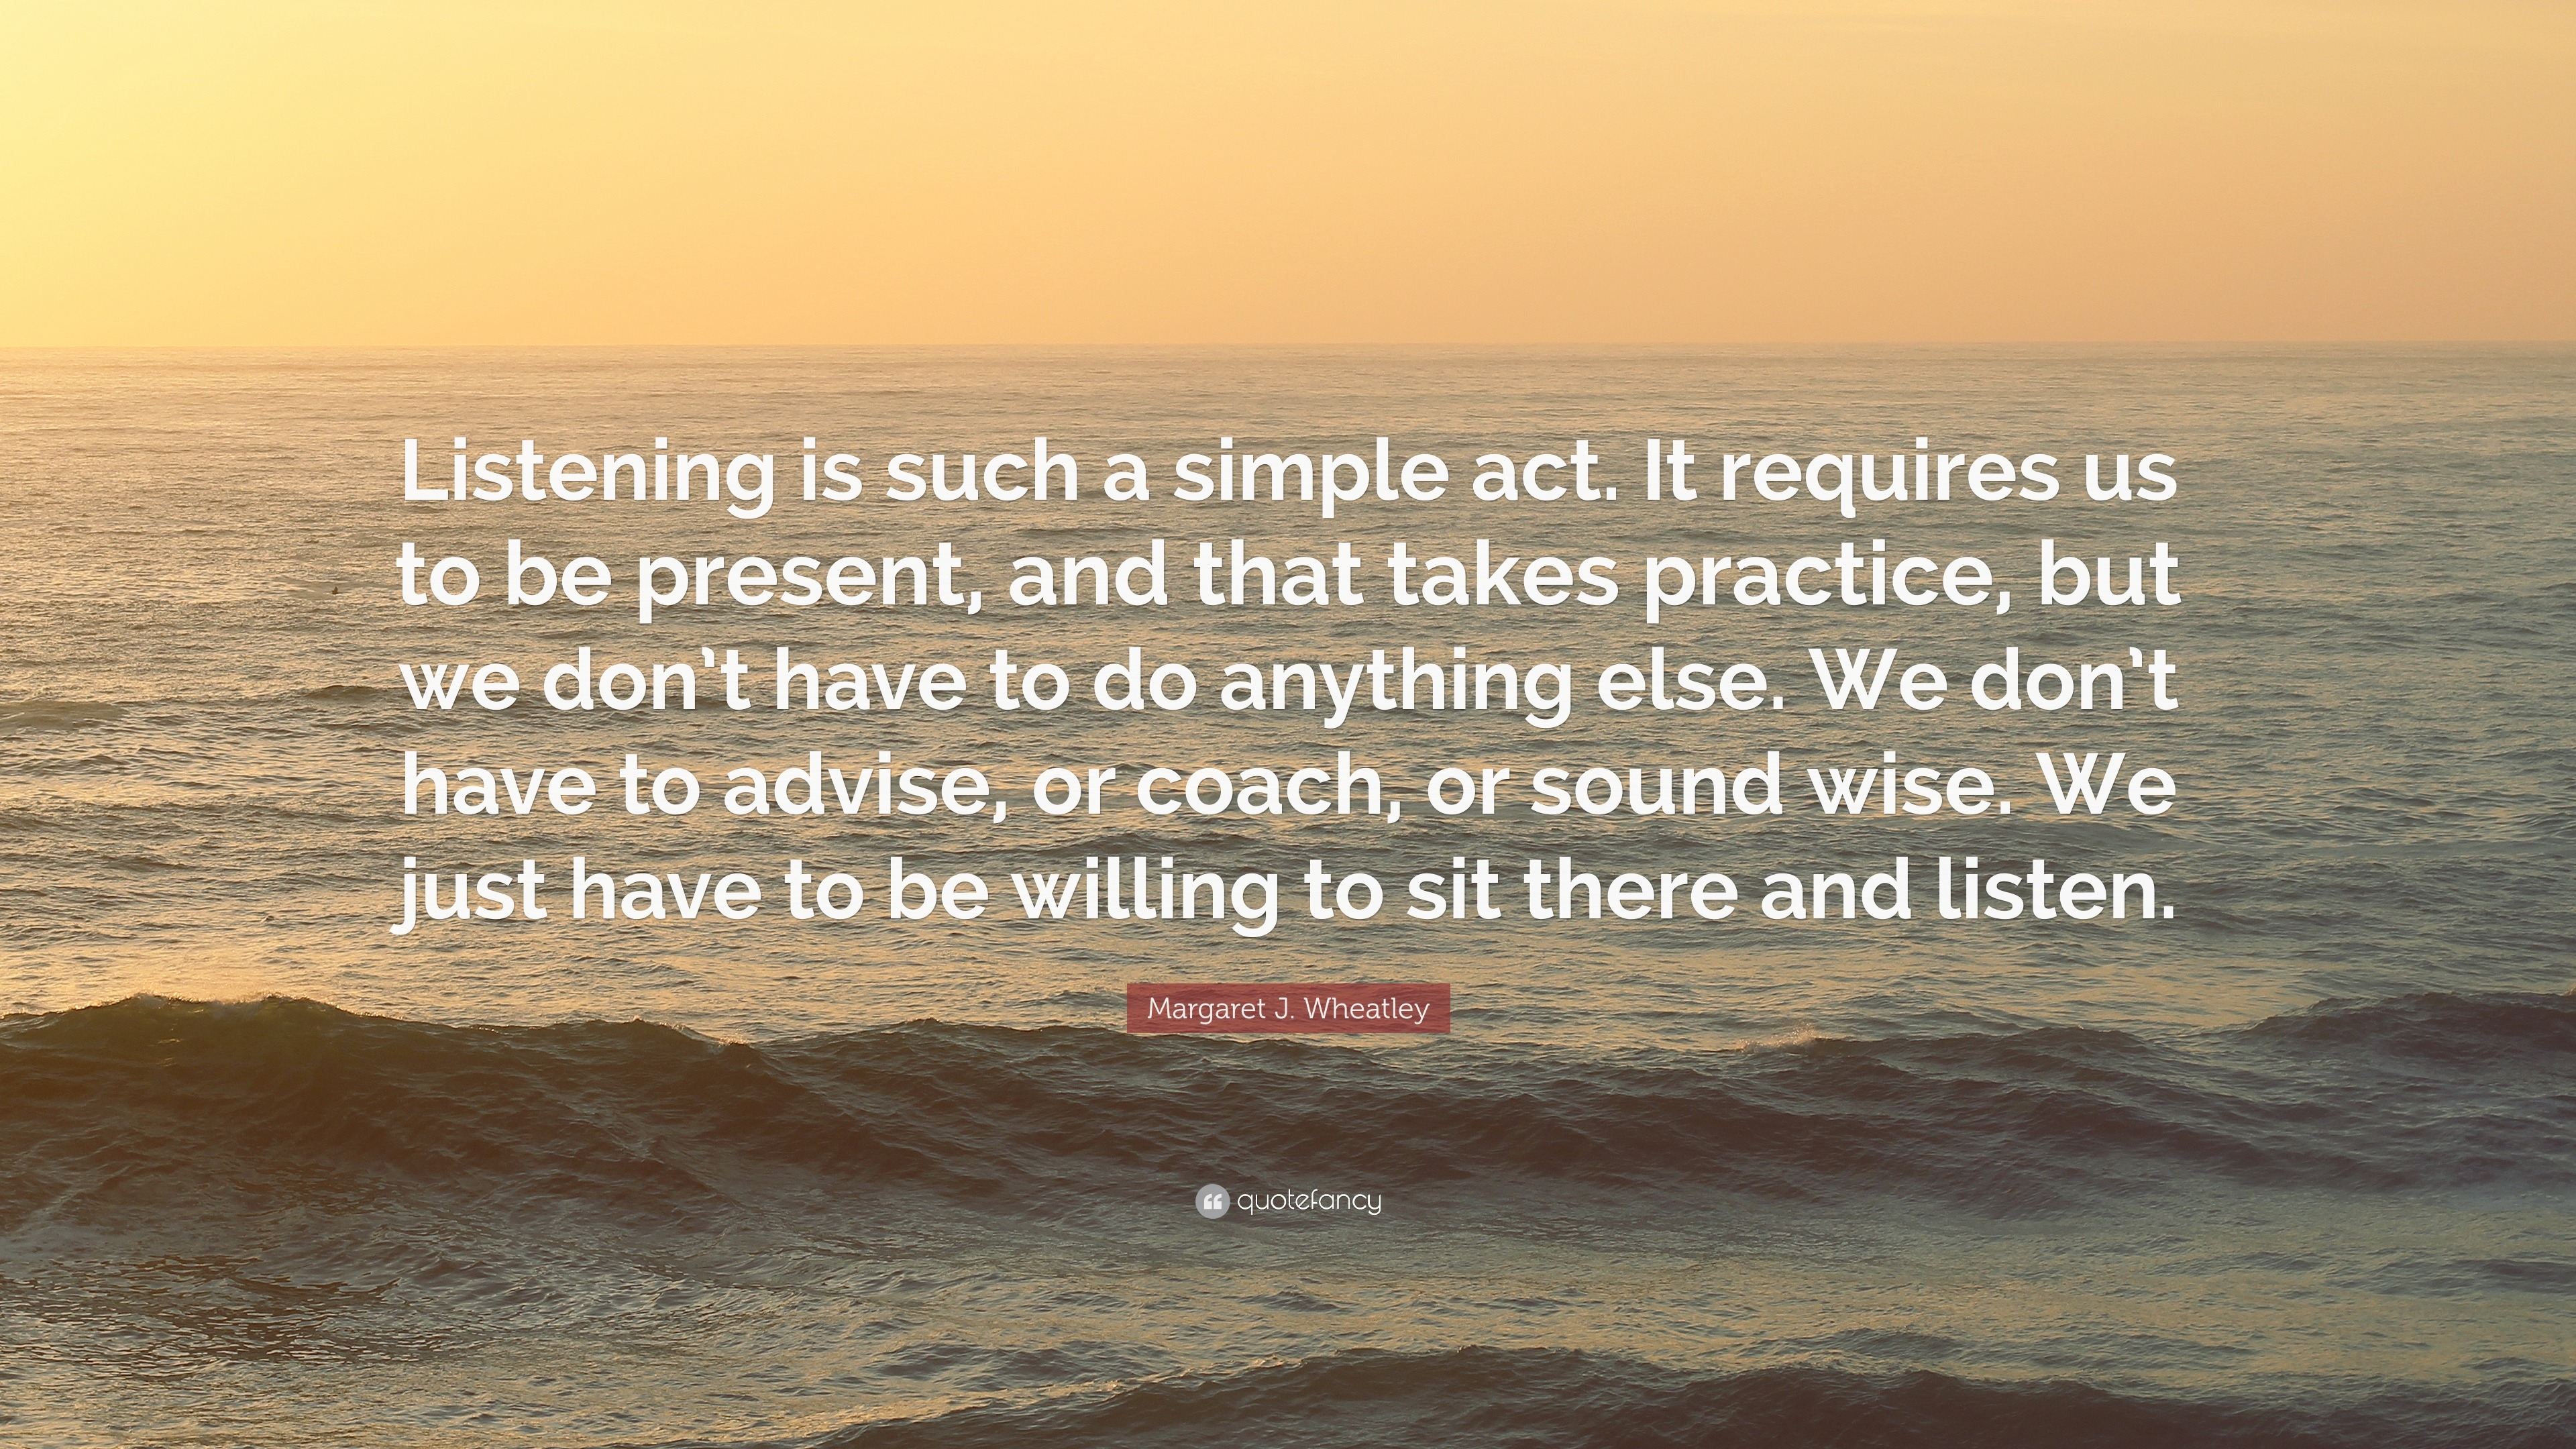 Margaret J. Wheatley Quote: “Listening is such a simple act. It ...